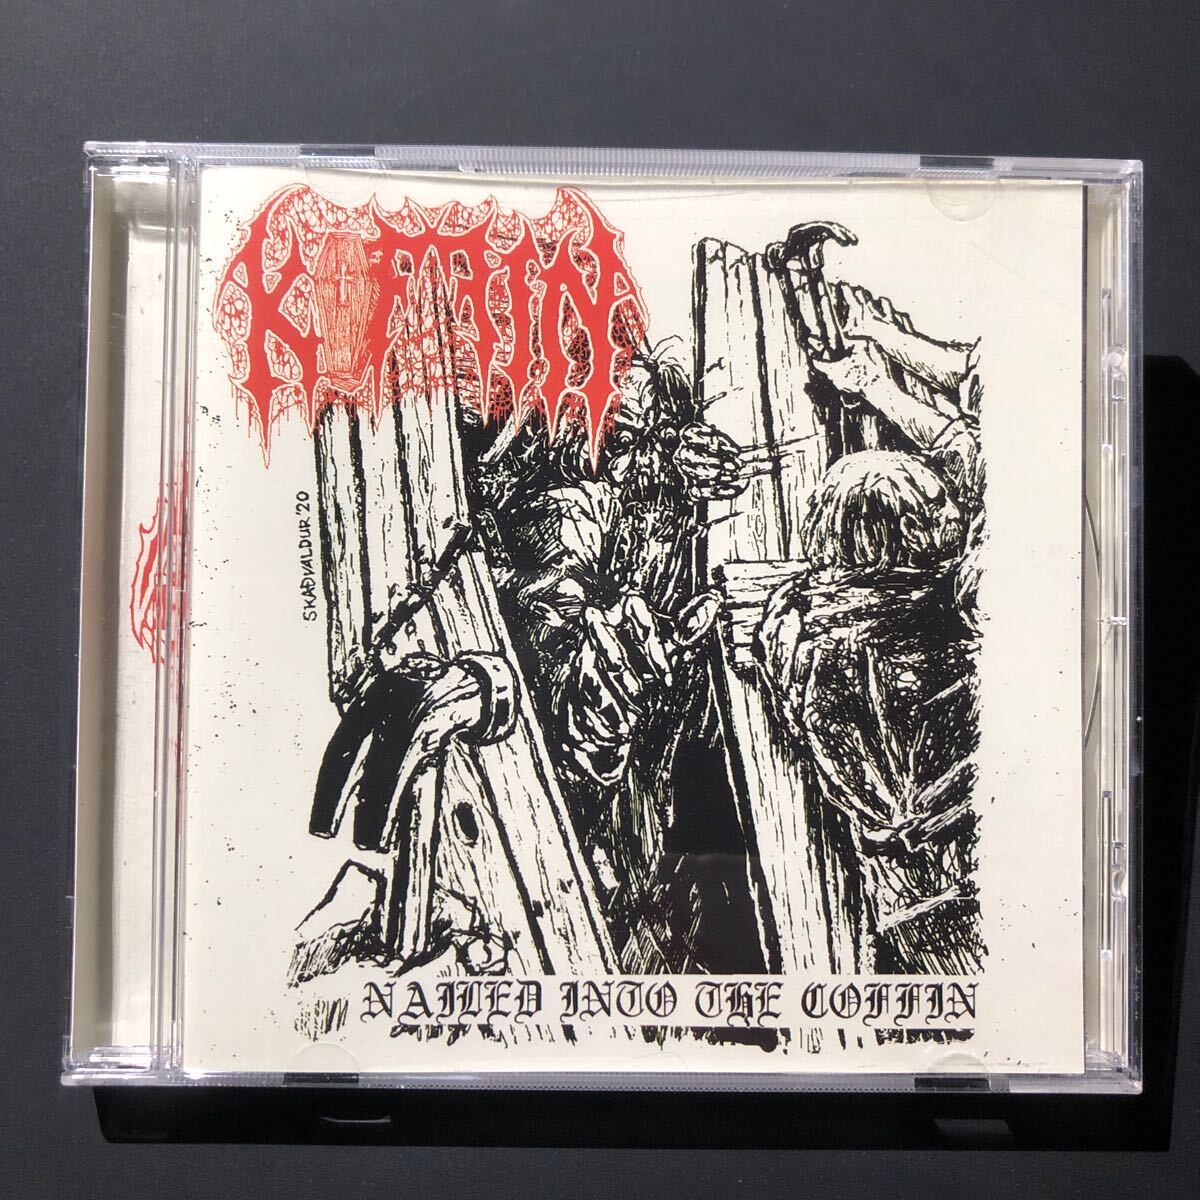 KOFFIN - Nailed Into The Coffin【CD】デスメタル グラインド death grind goreの画像1